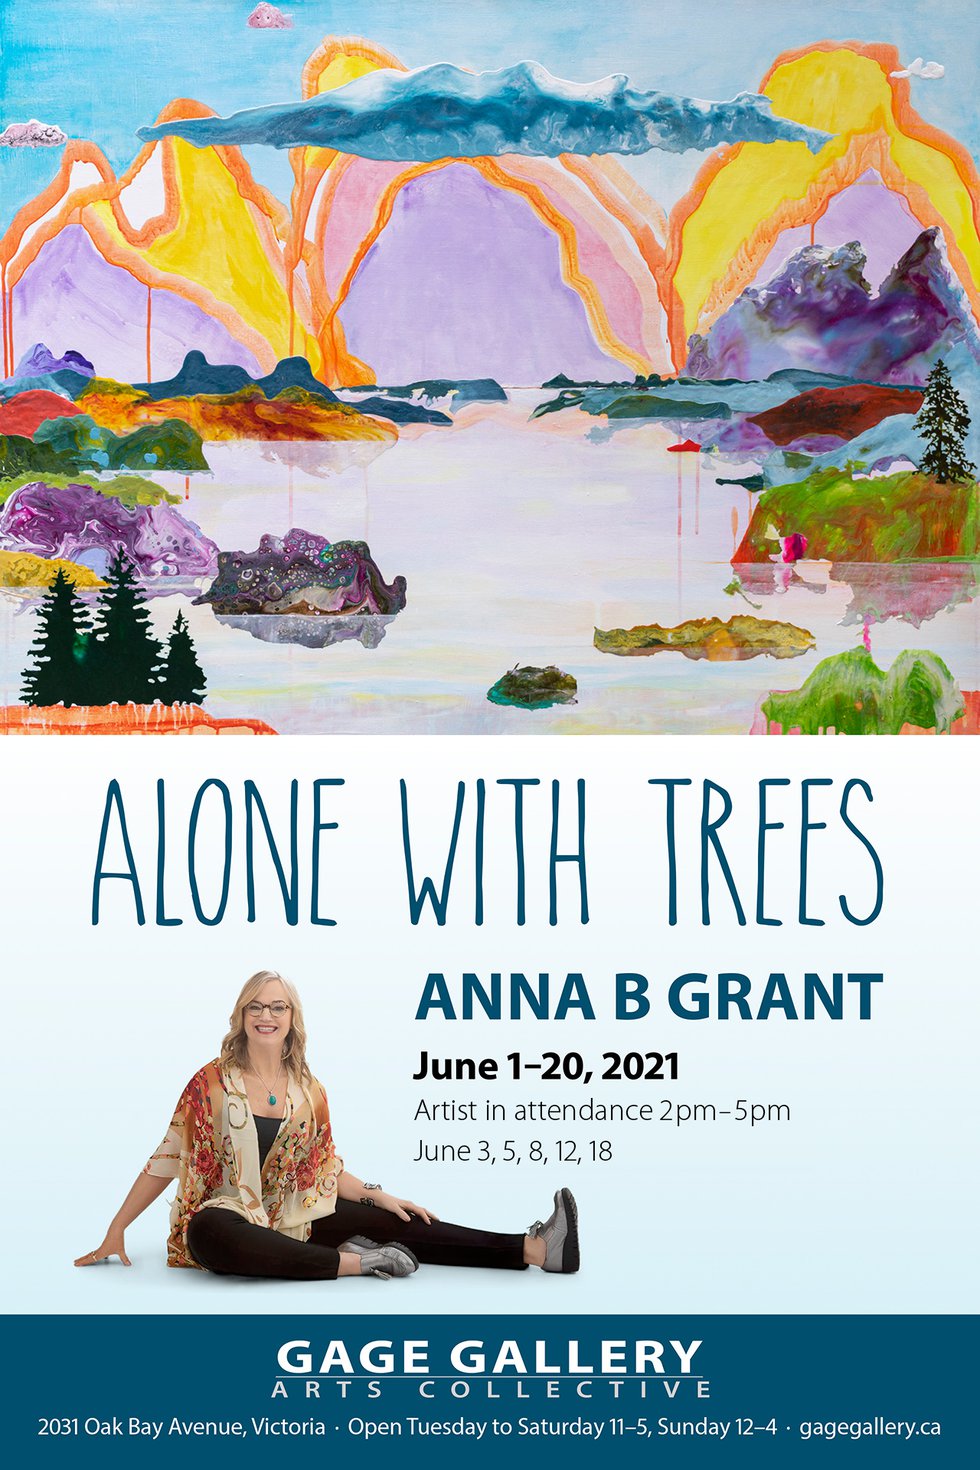 Anna B Grant, "Alone with Trees," 2021